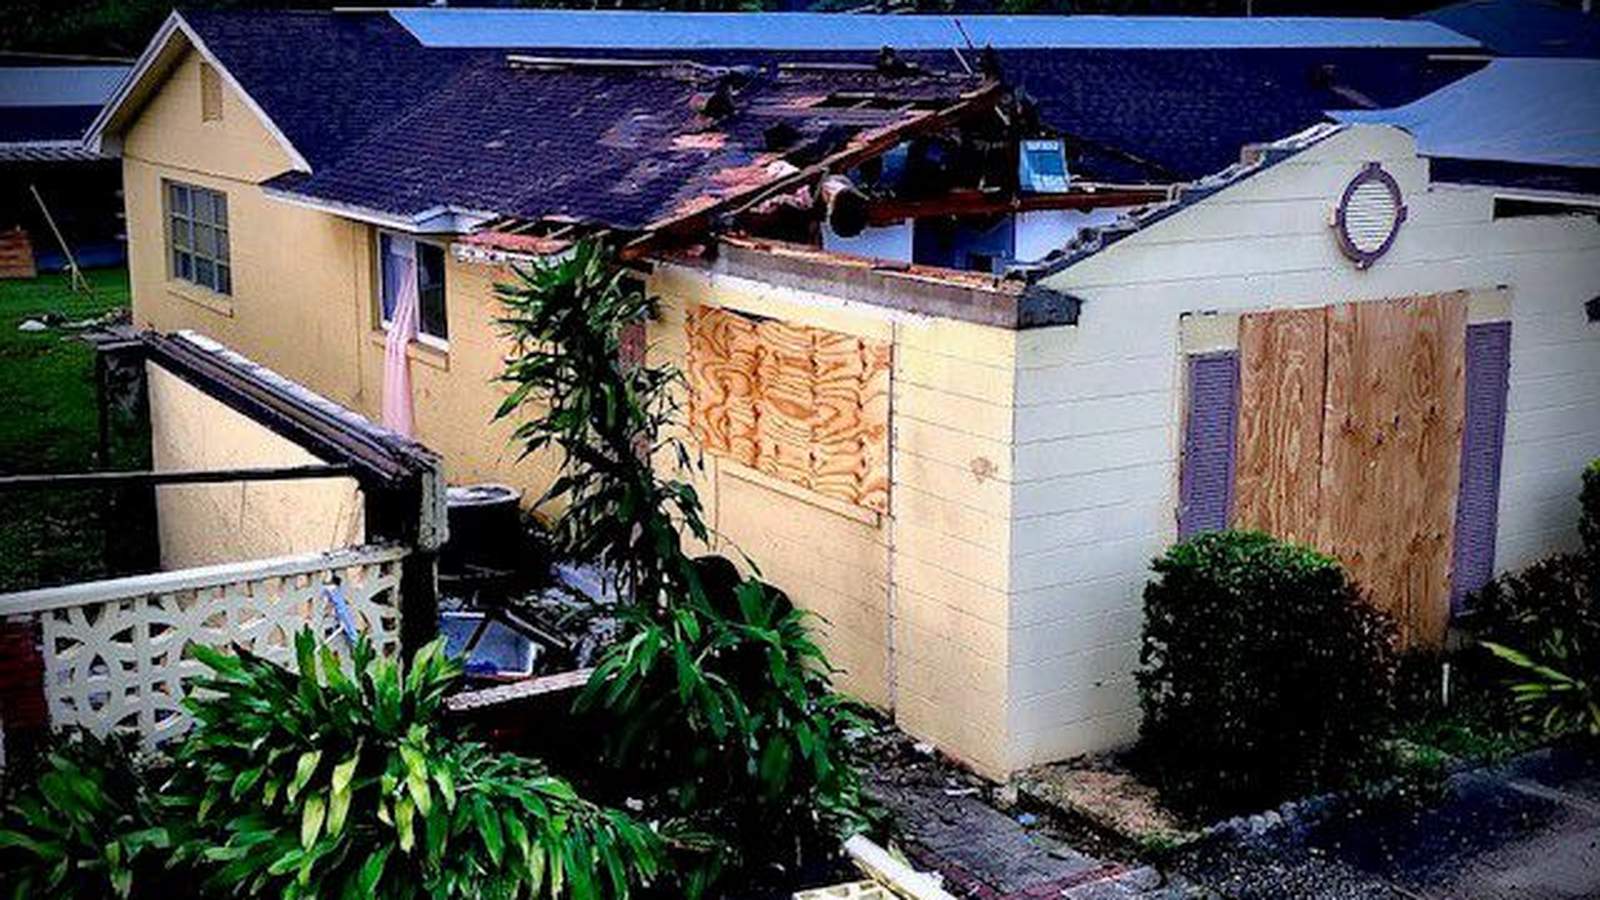 Tornadoes caused nearly $1 million in damages, according to Orange County property appraiser